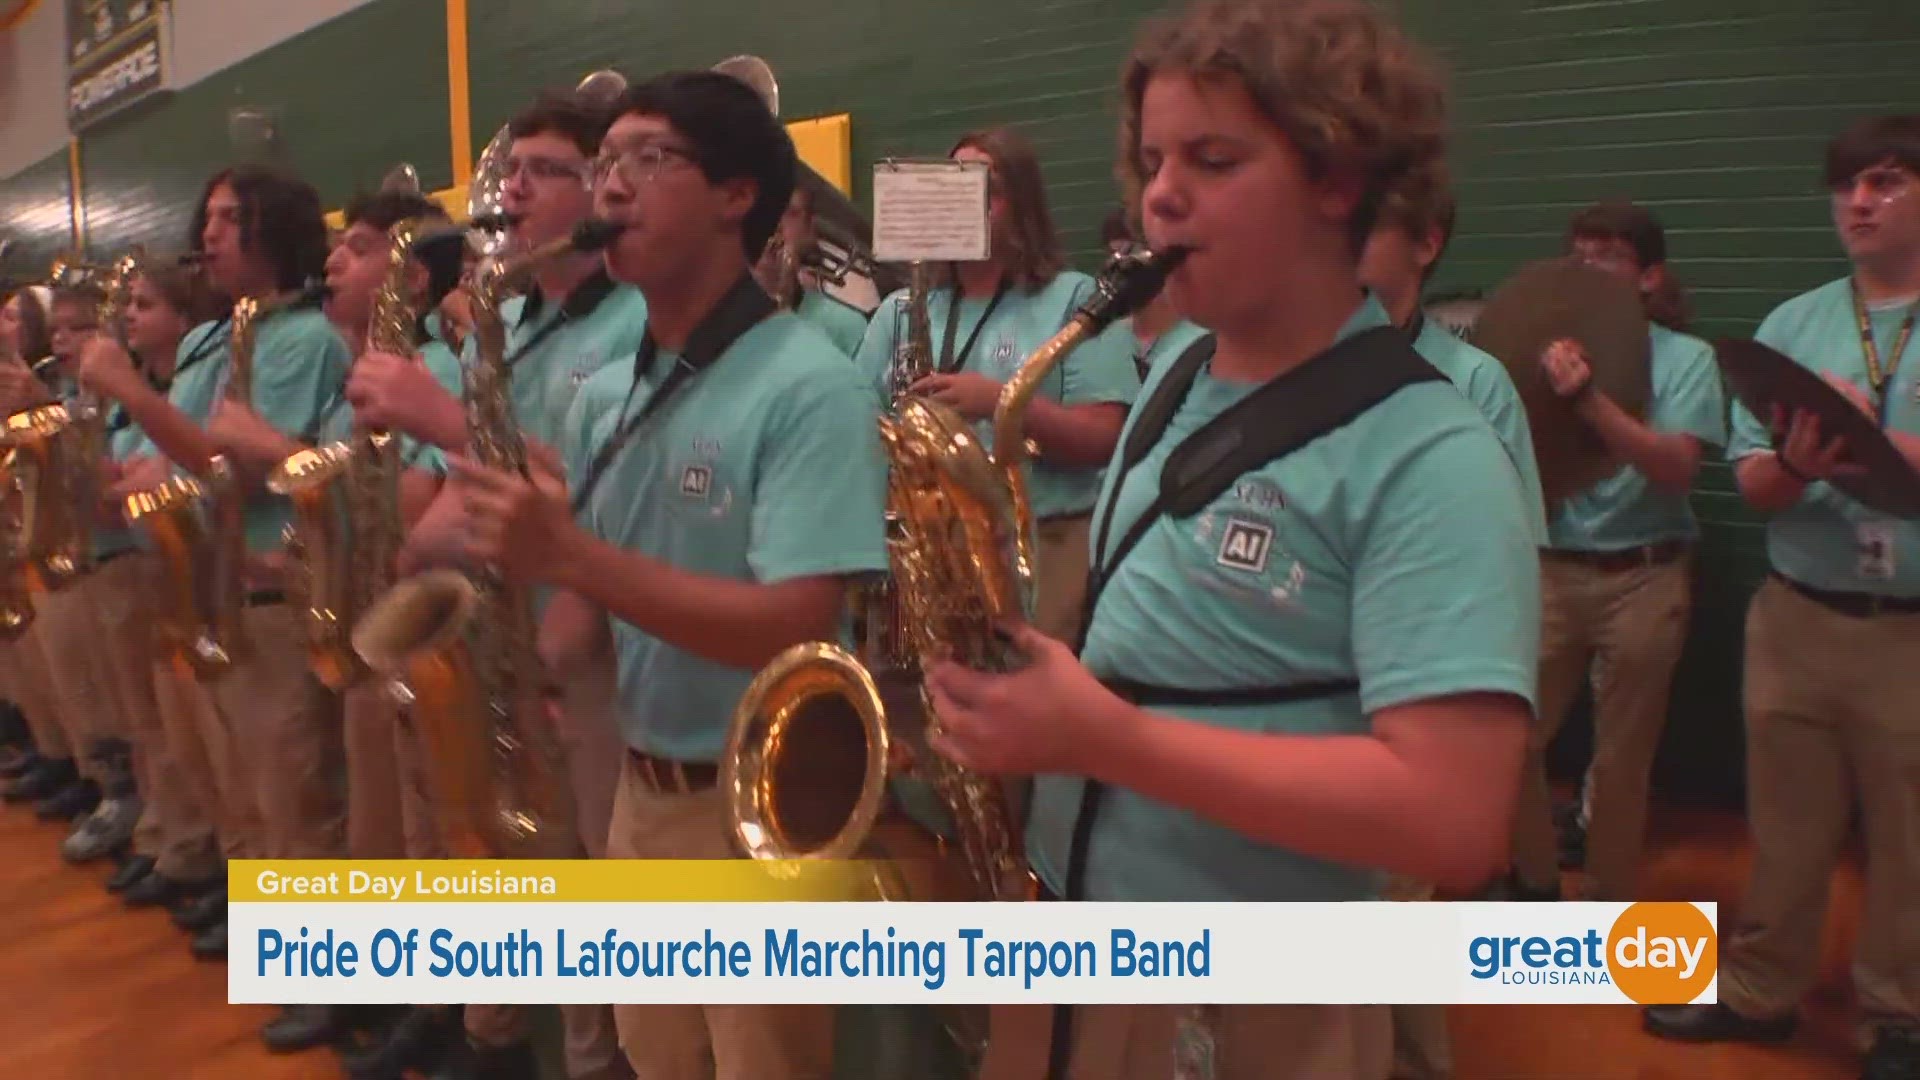 The band members from Central and South Lafourche High Schools put on a show for us!